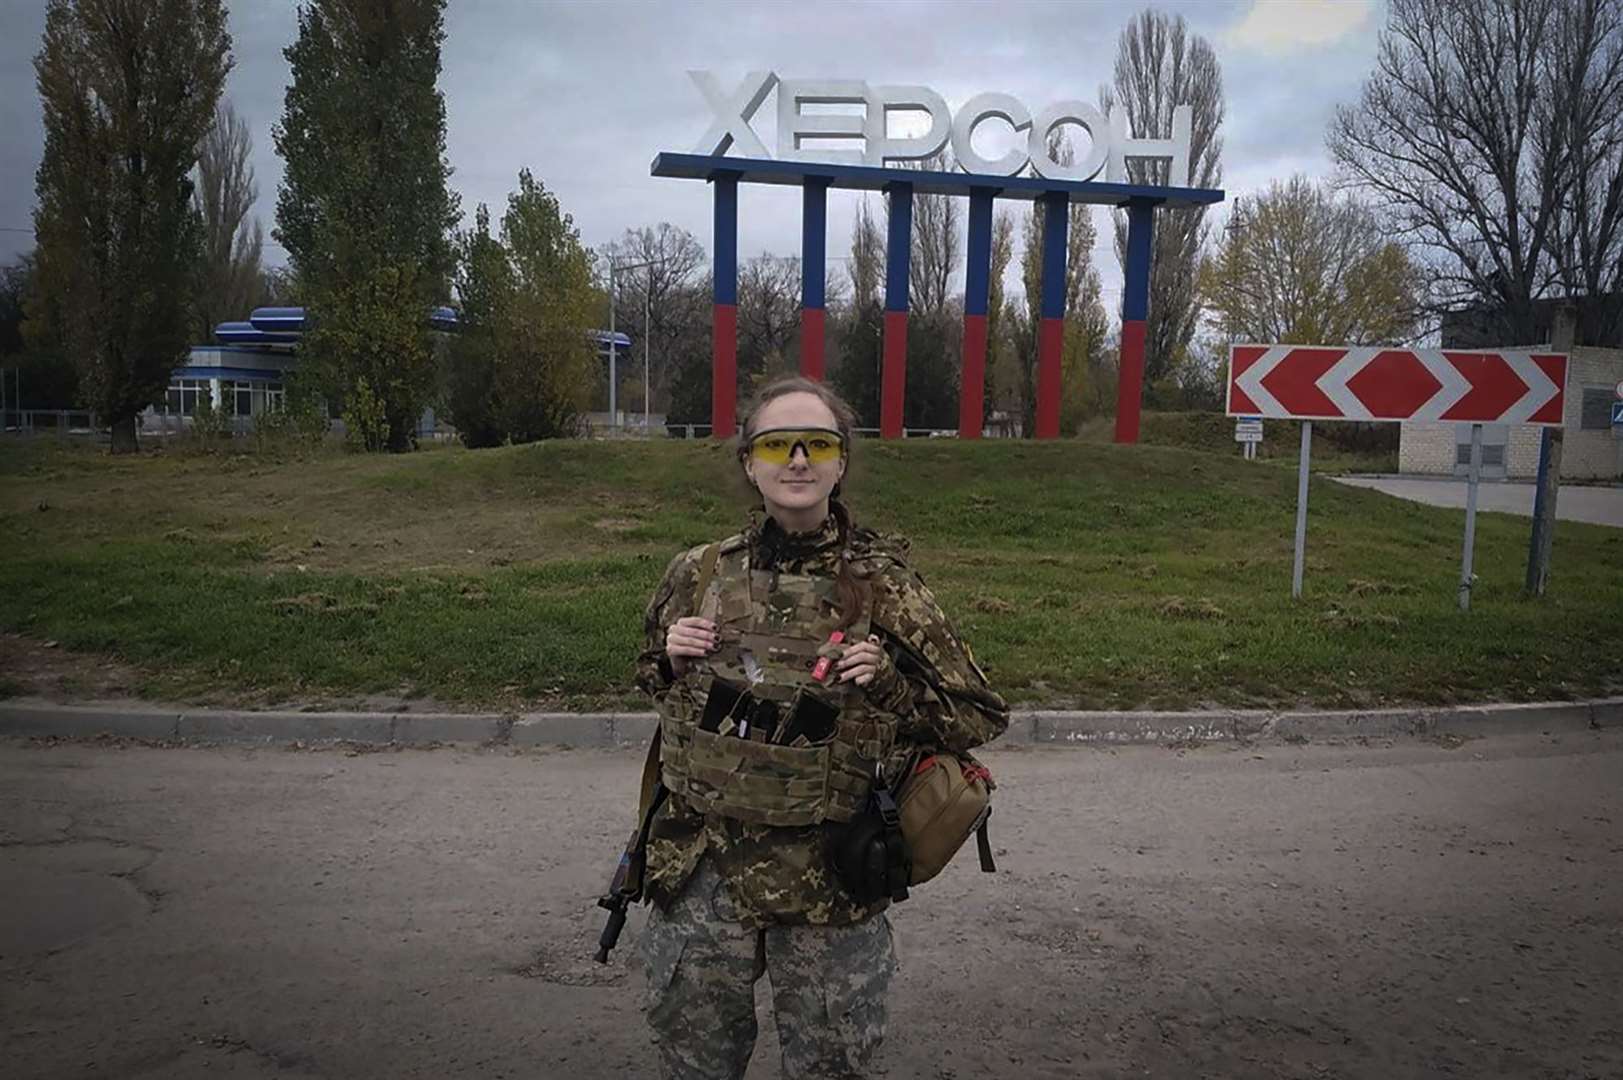 A female Ukrainian soldier poses for a photo against a Kherson sign in the background (Dagaz/AP)